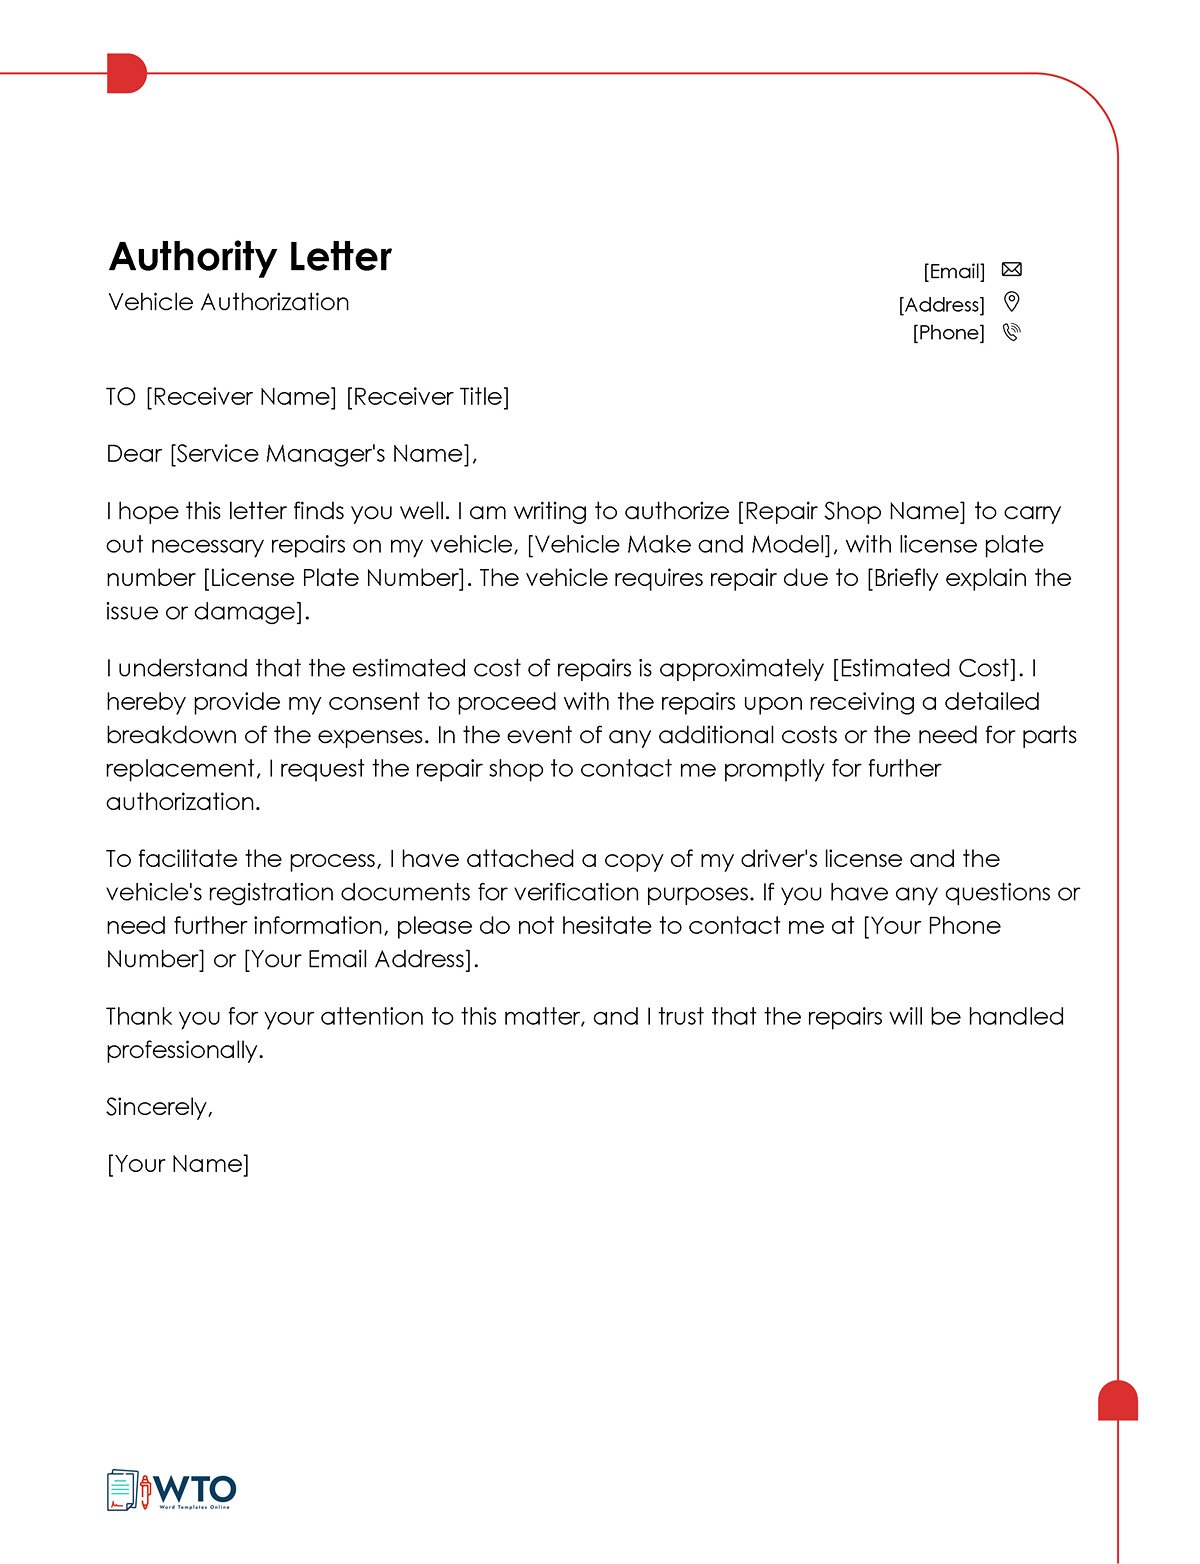 Vehicle Authorization Letter Template-Free Downloadable